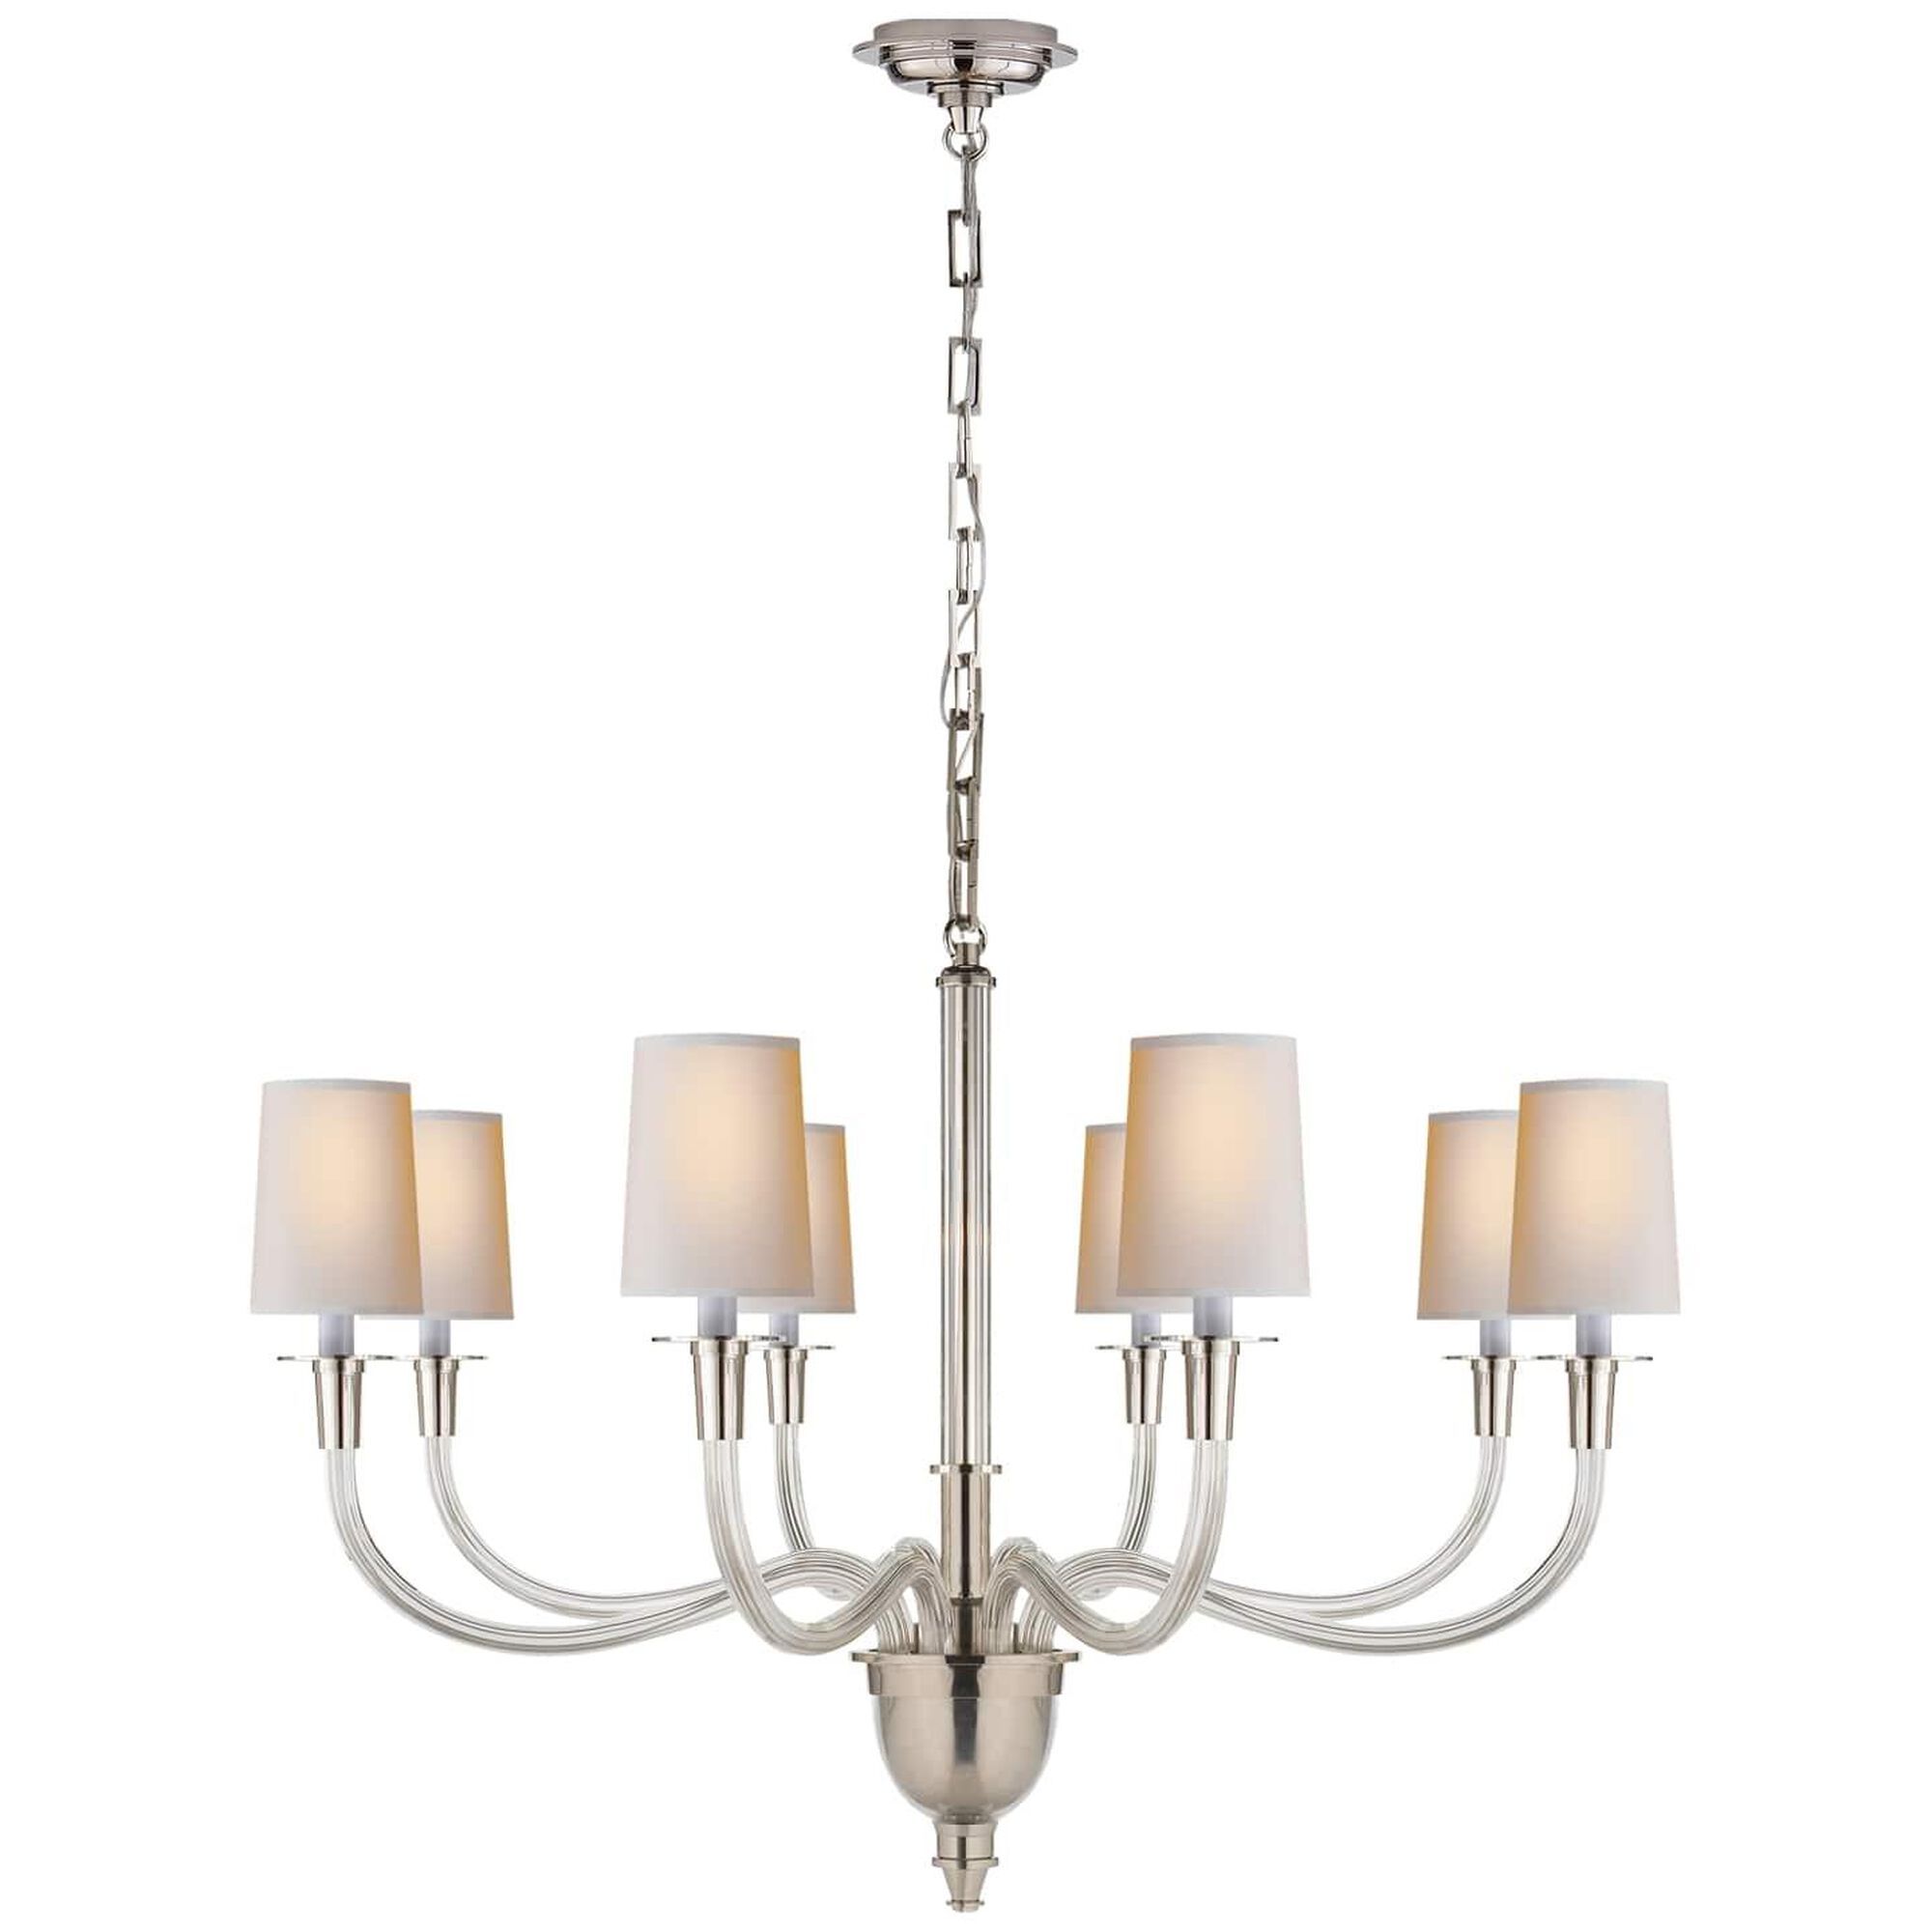 Thomas O'Brien Vivian 36 Inch 8 Light Chandelier by Visual Comfort and Co. | 1800 Lighting